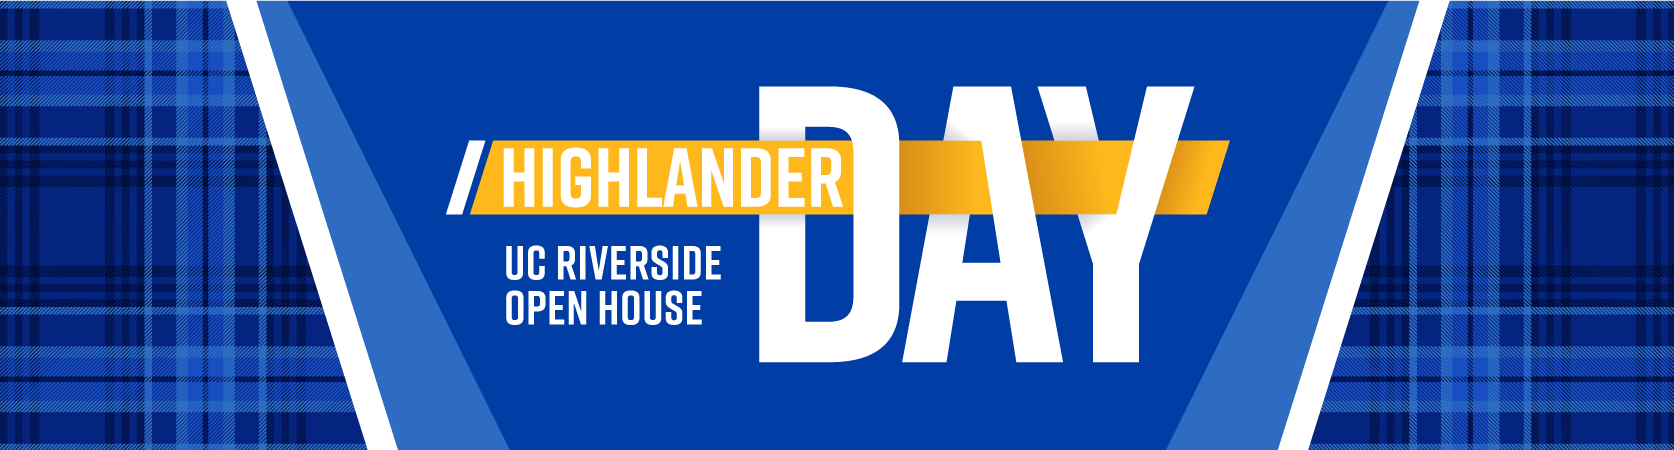 Graphic promoting UCR's Highlander Day Open House